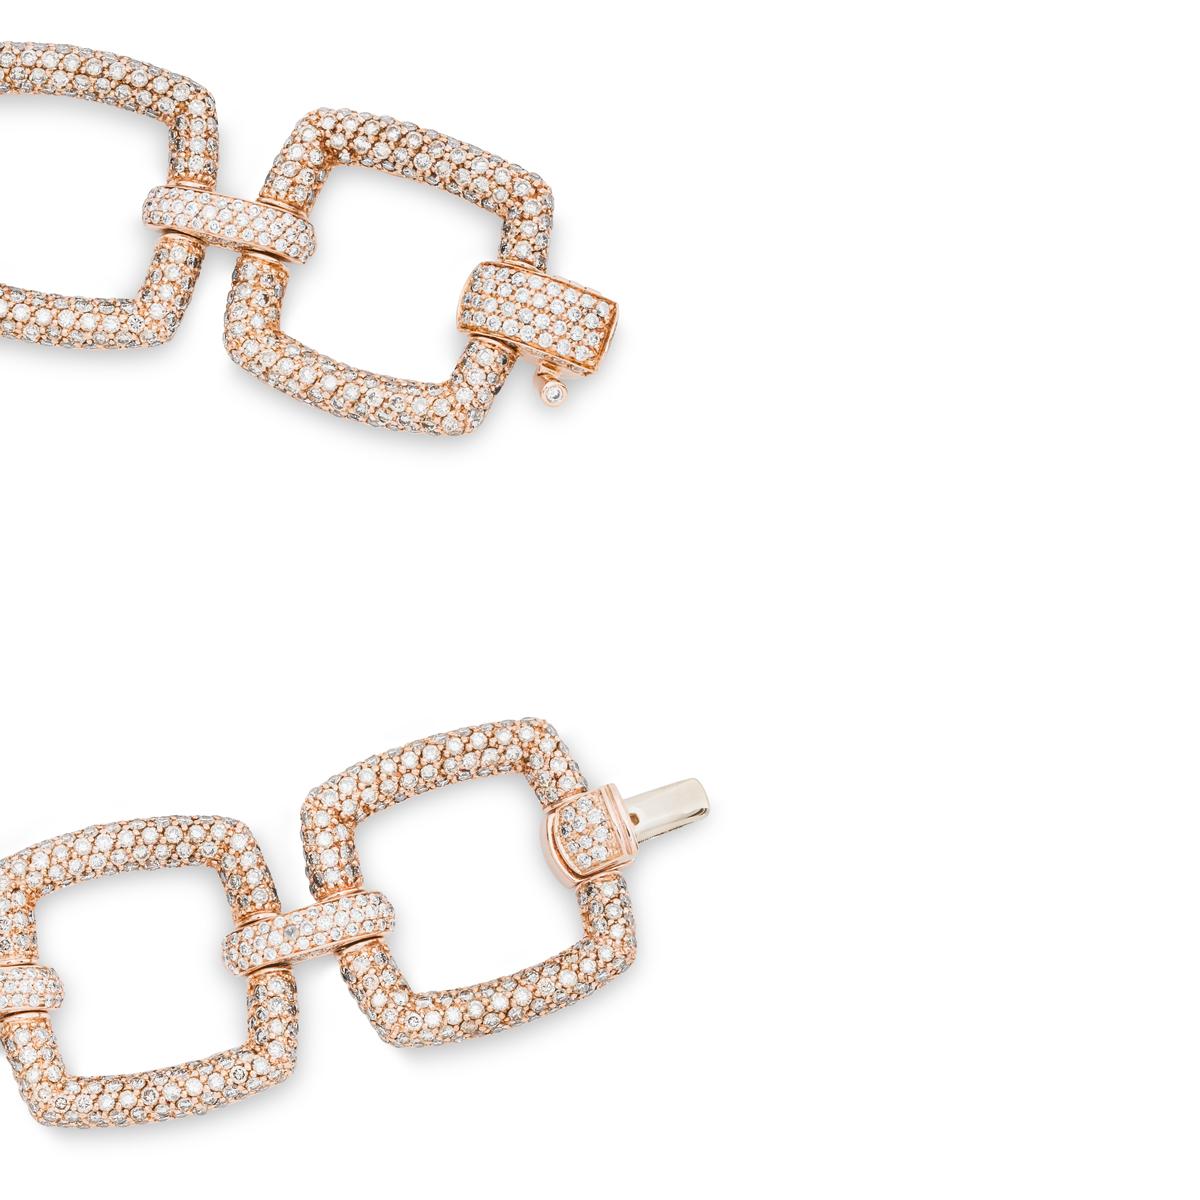 Rose Gold Brown & White Diamond Link Bracelet 13.65 Carat TDW In Excellent Condition For Sale In London, GB